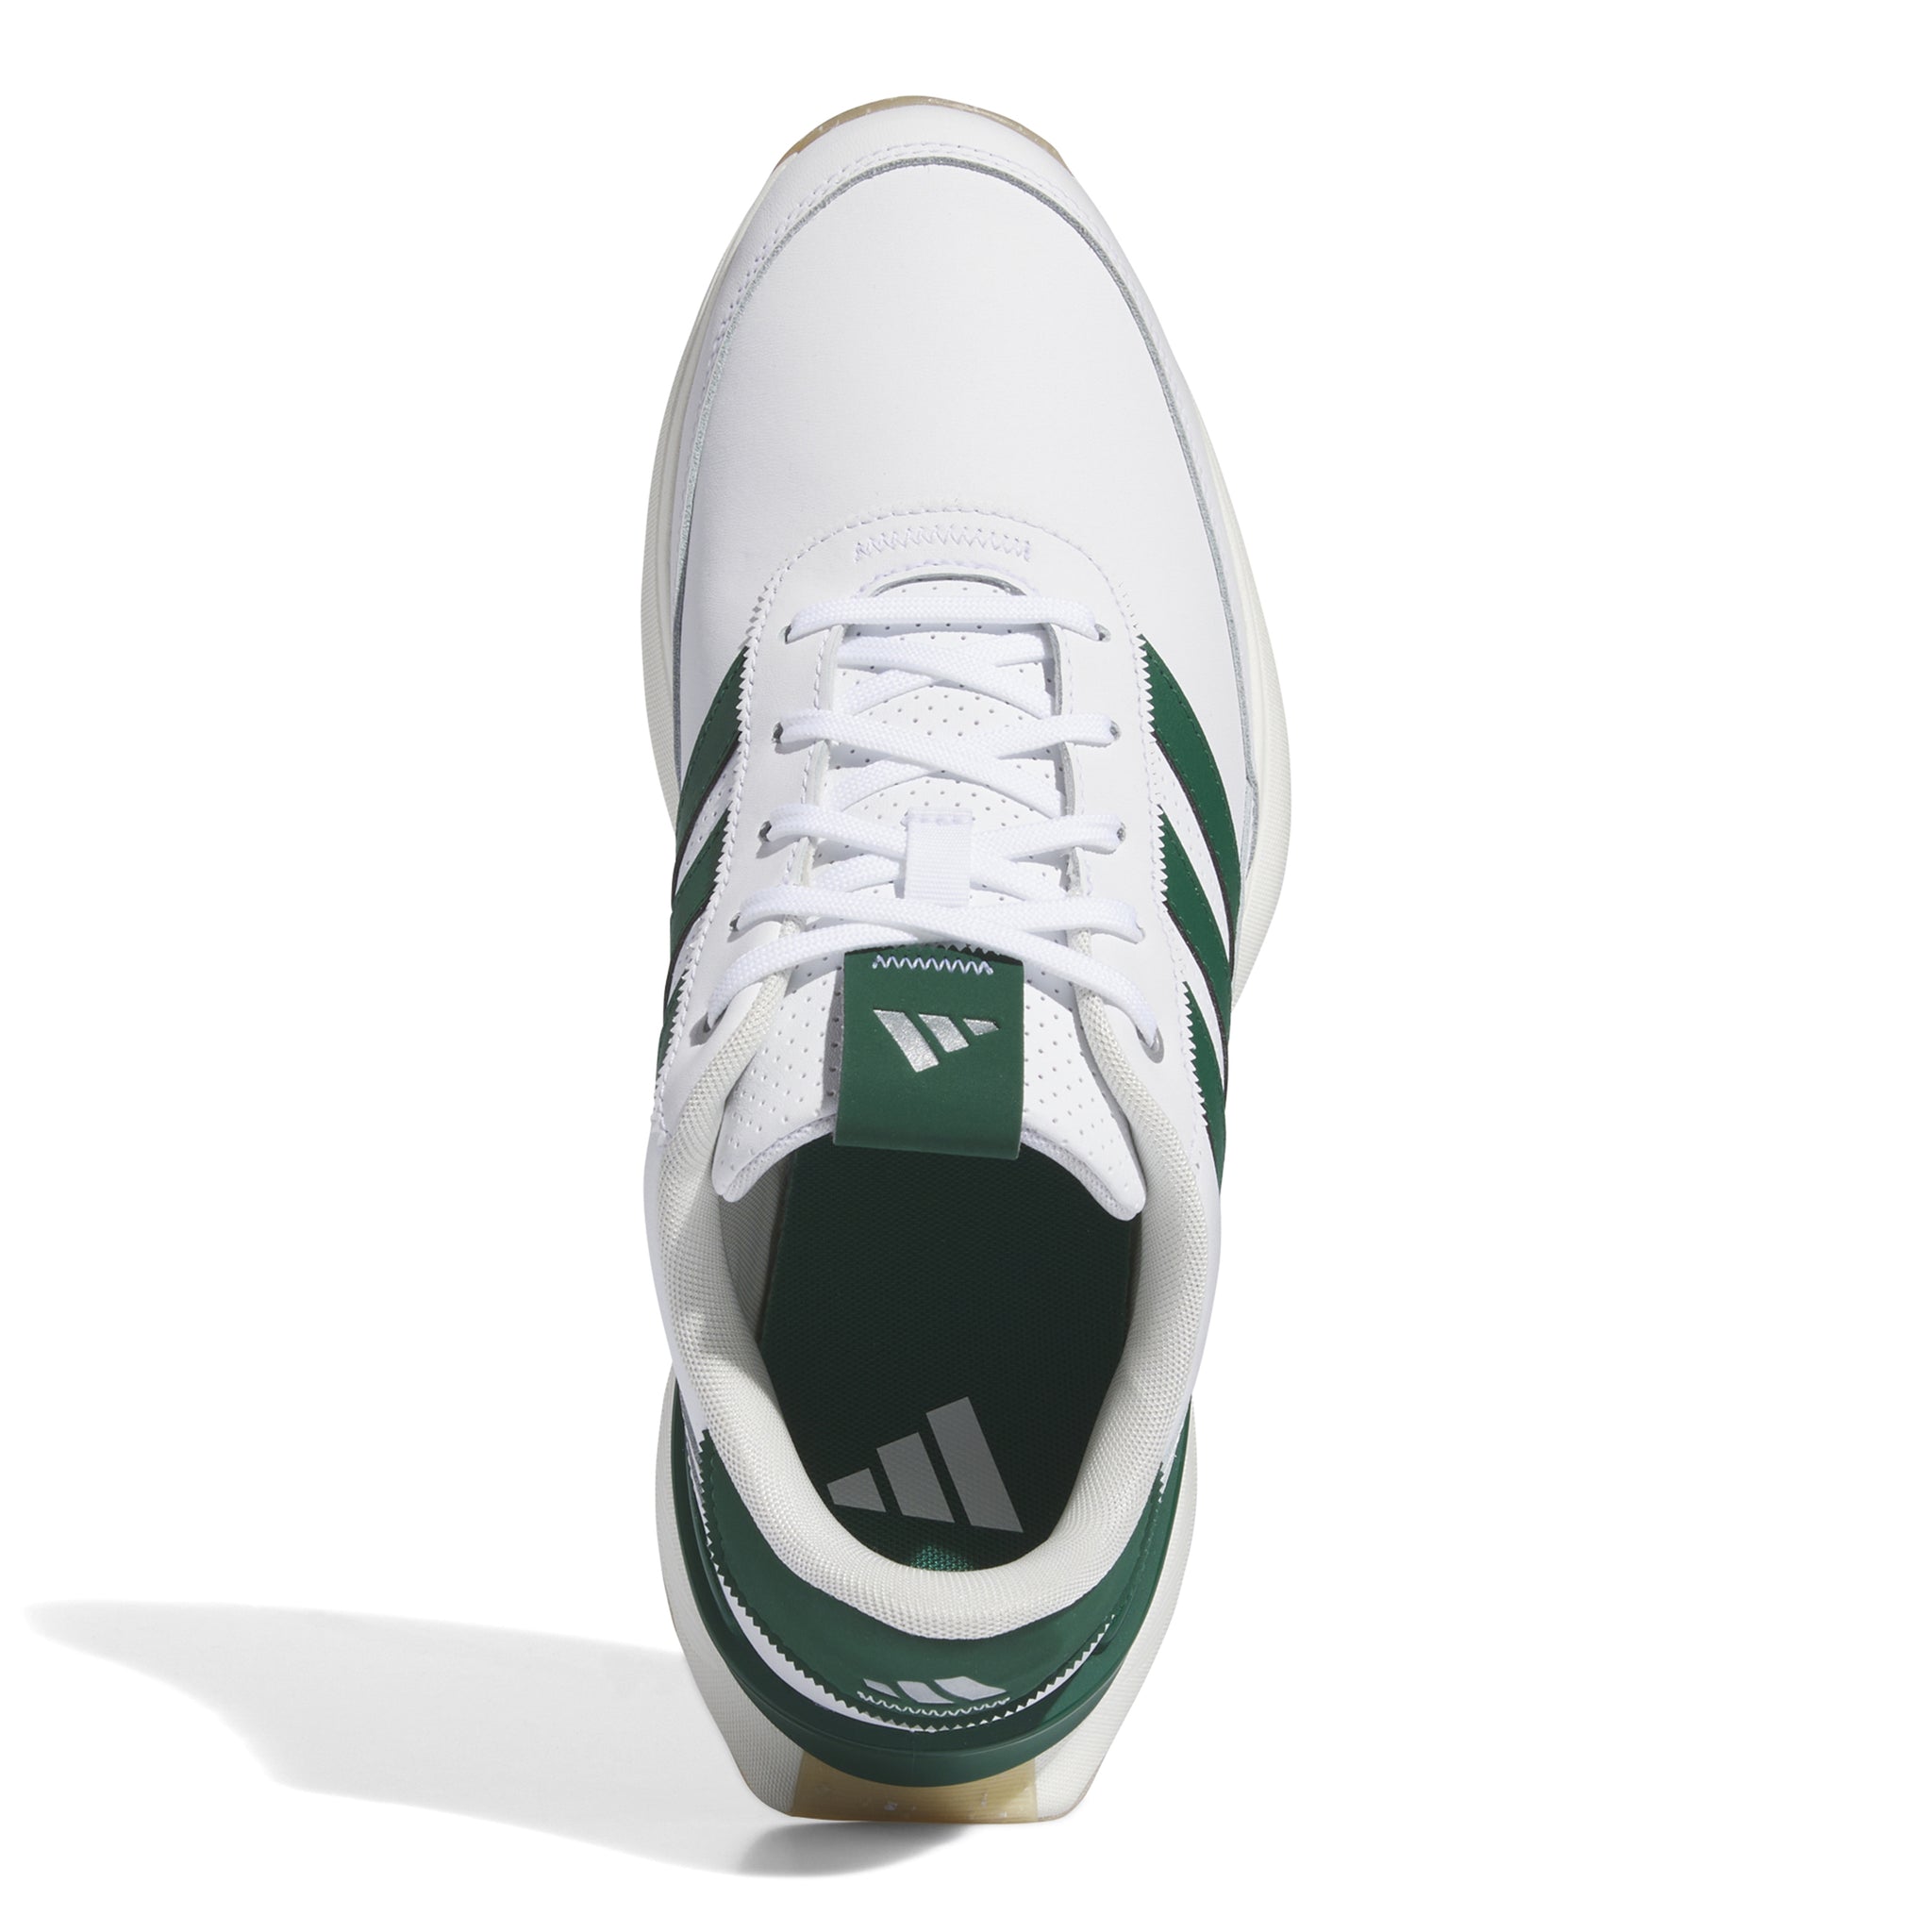 adidas-s2g-sl-leather-24-golf-shoes-if0299-white-collegiate-green-gum-4